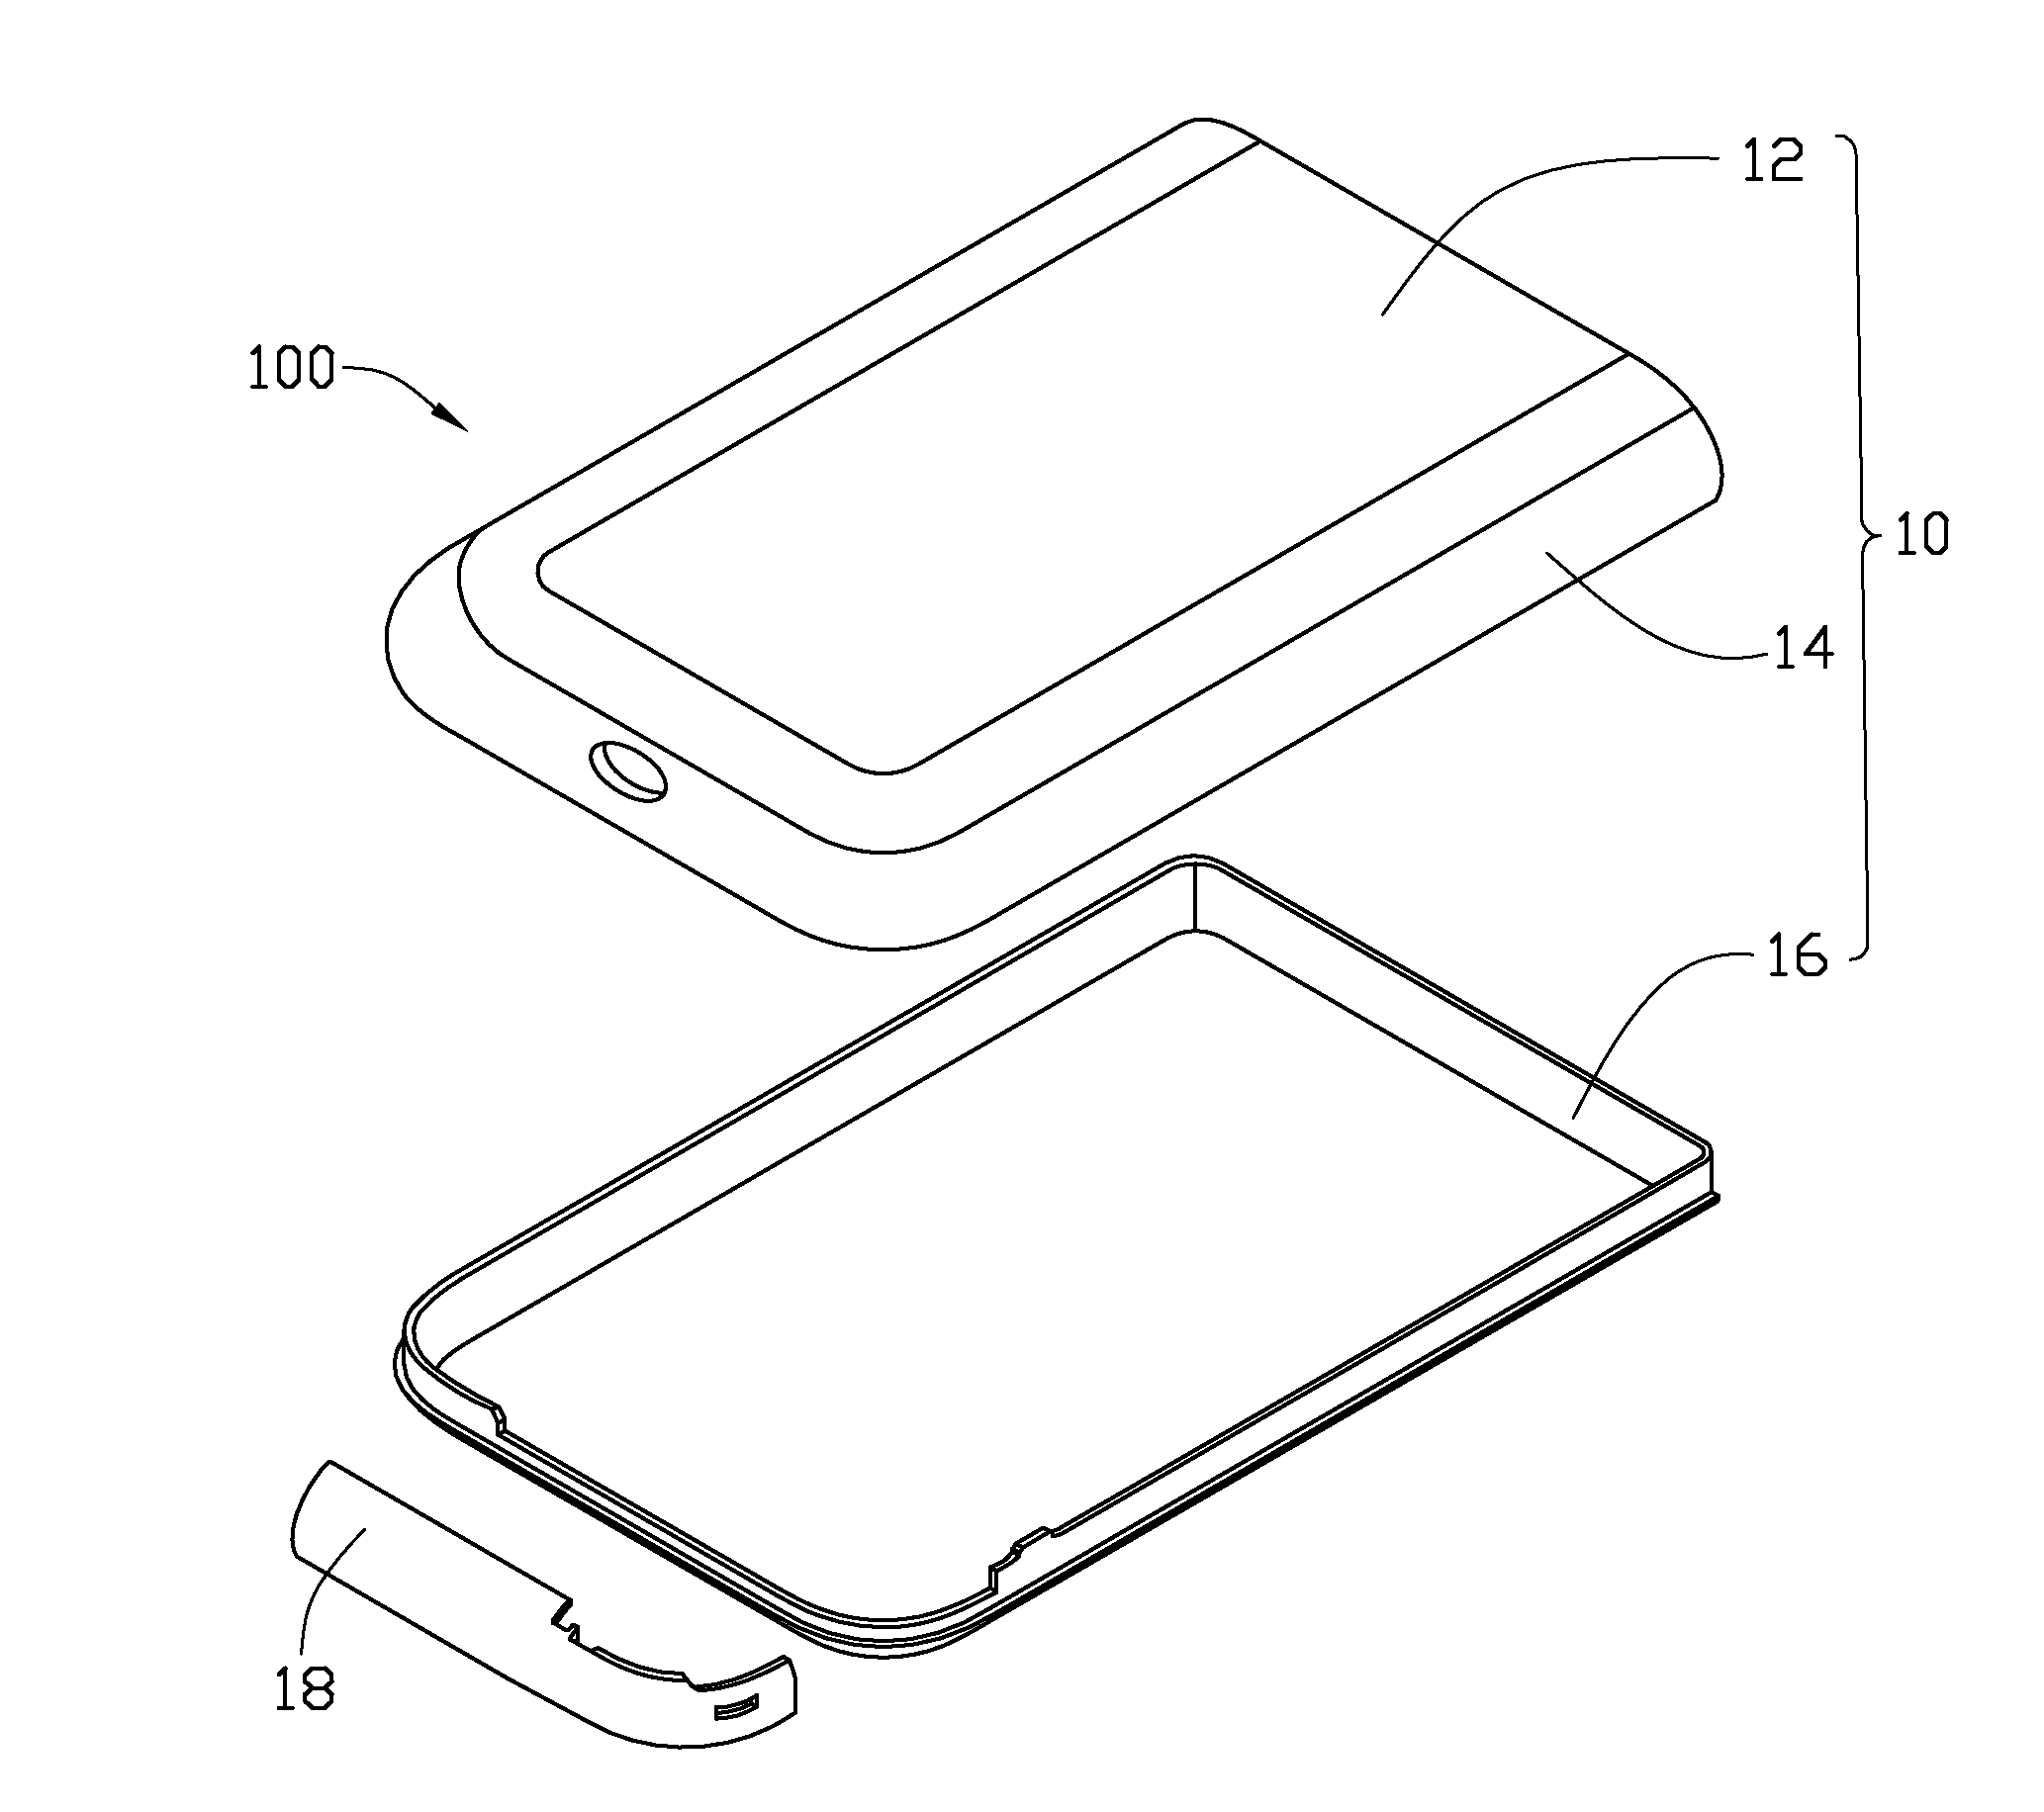 Housing for portable electronic device